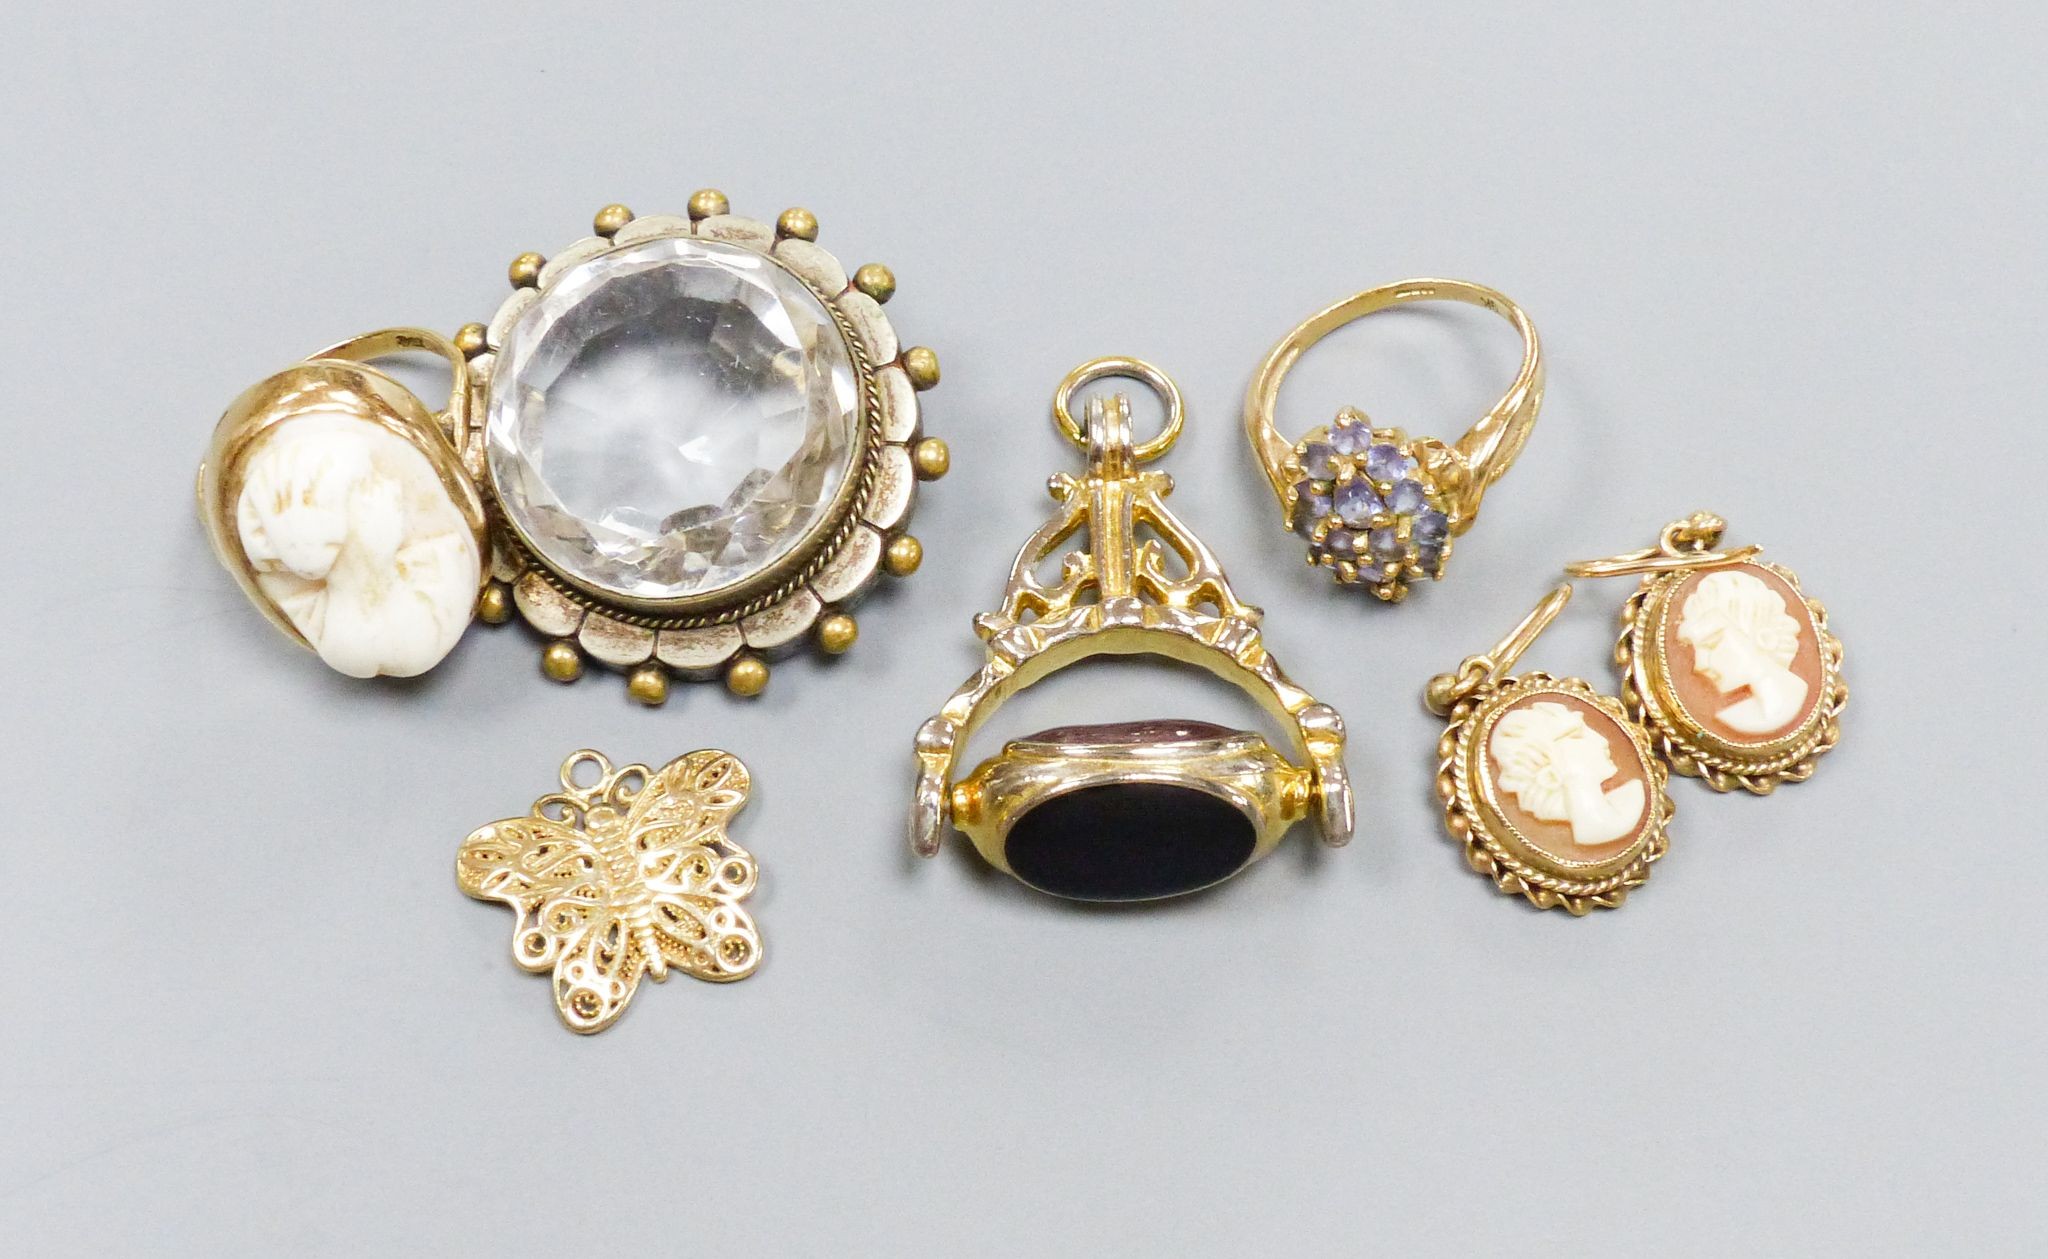 A 9ct gold cameo ring, a pair of similar earrings, yellow metal settings, a 9ct gold gem-set ring, a 'fob seal' pendant, a silver-gilt butterfly pendant and a clear paste-set pendant